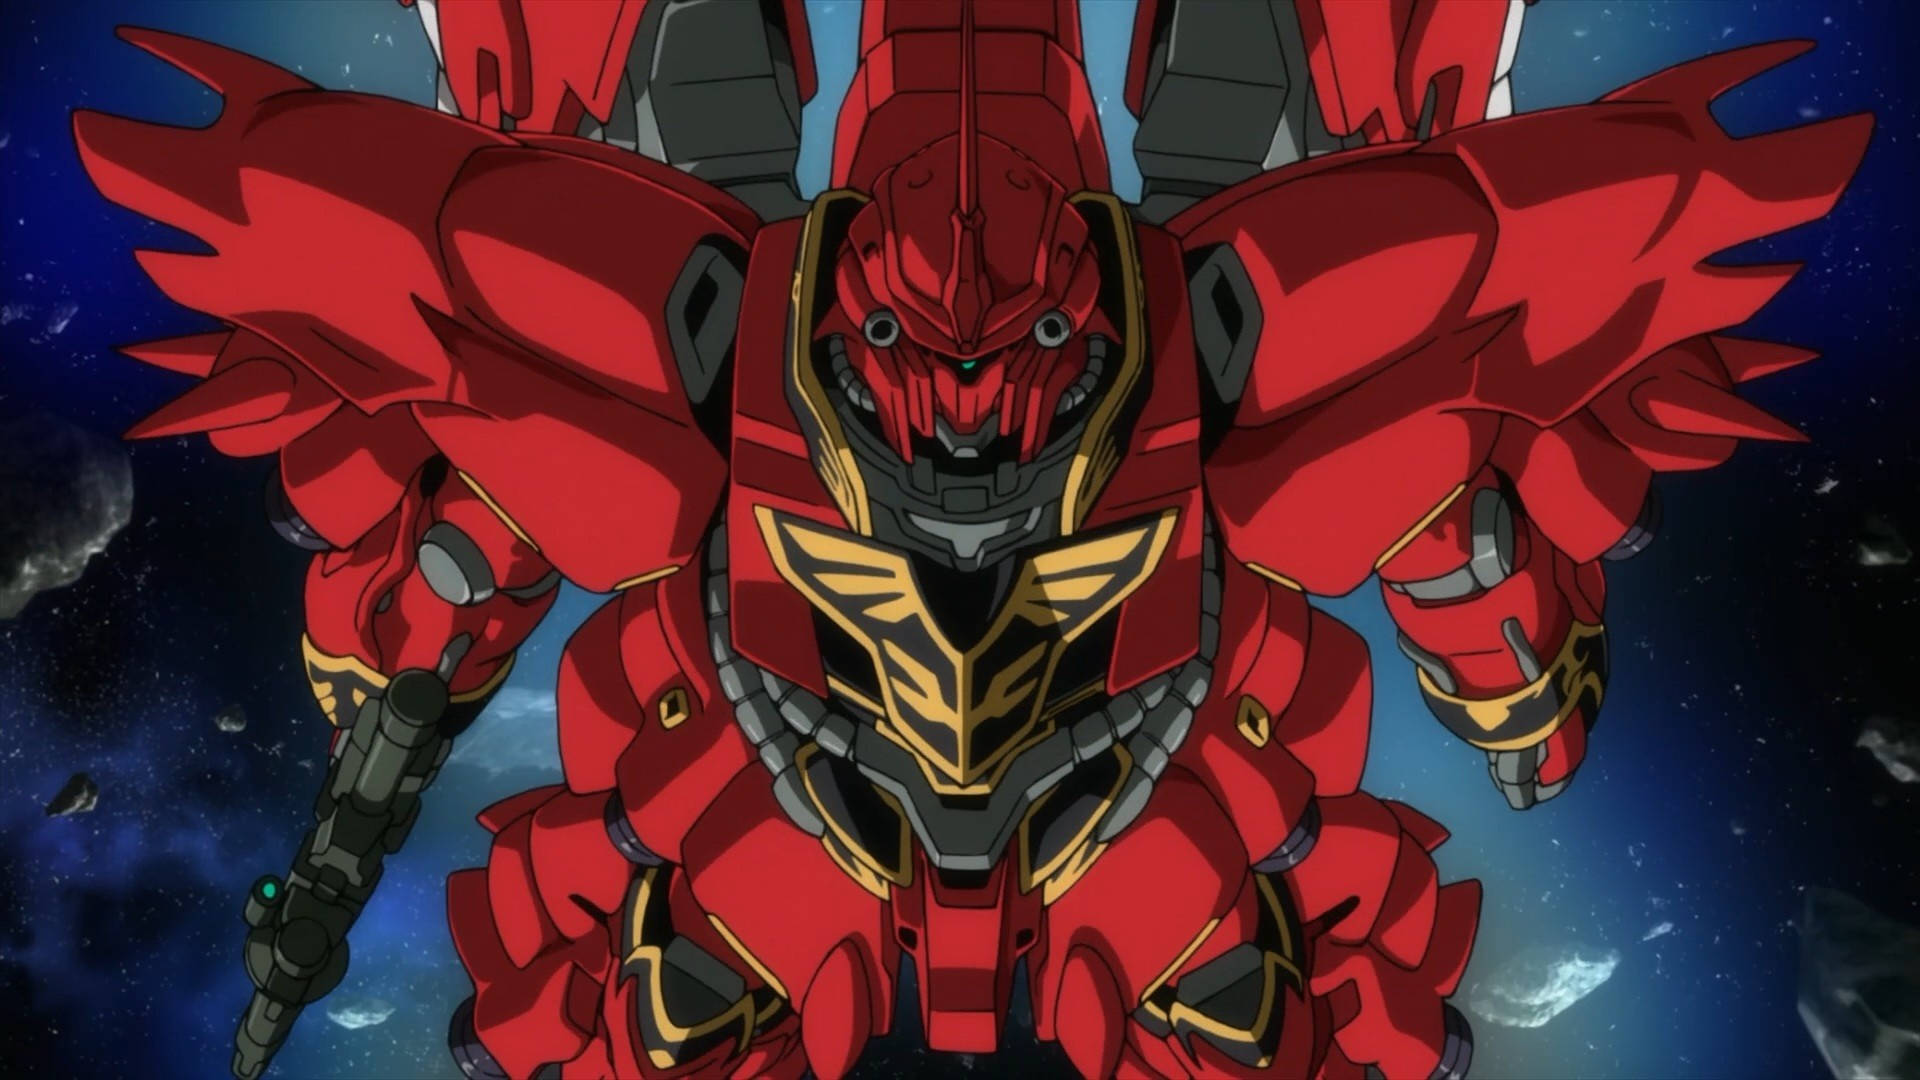 Red Mobile Suit Gundam In Space Wallpaper